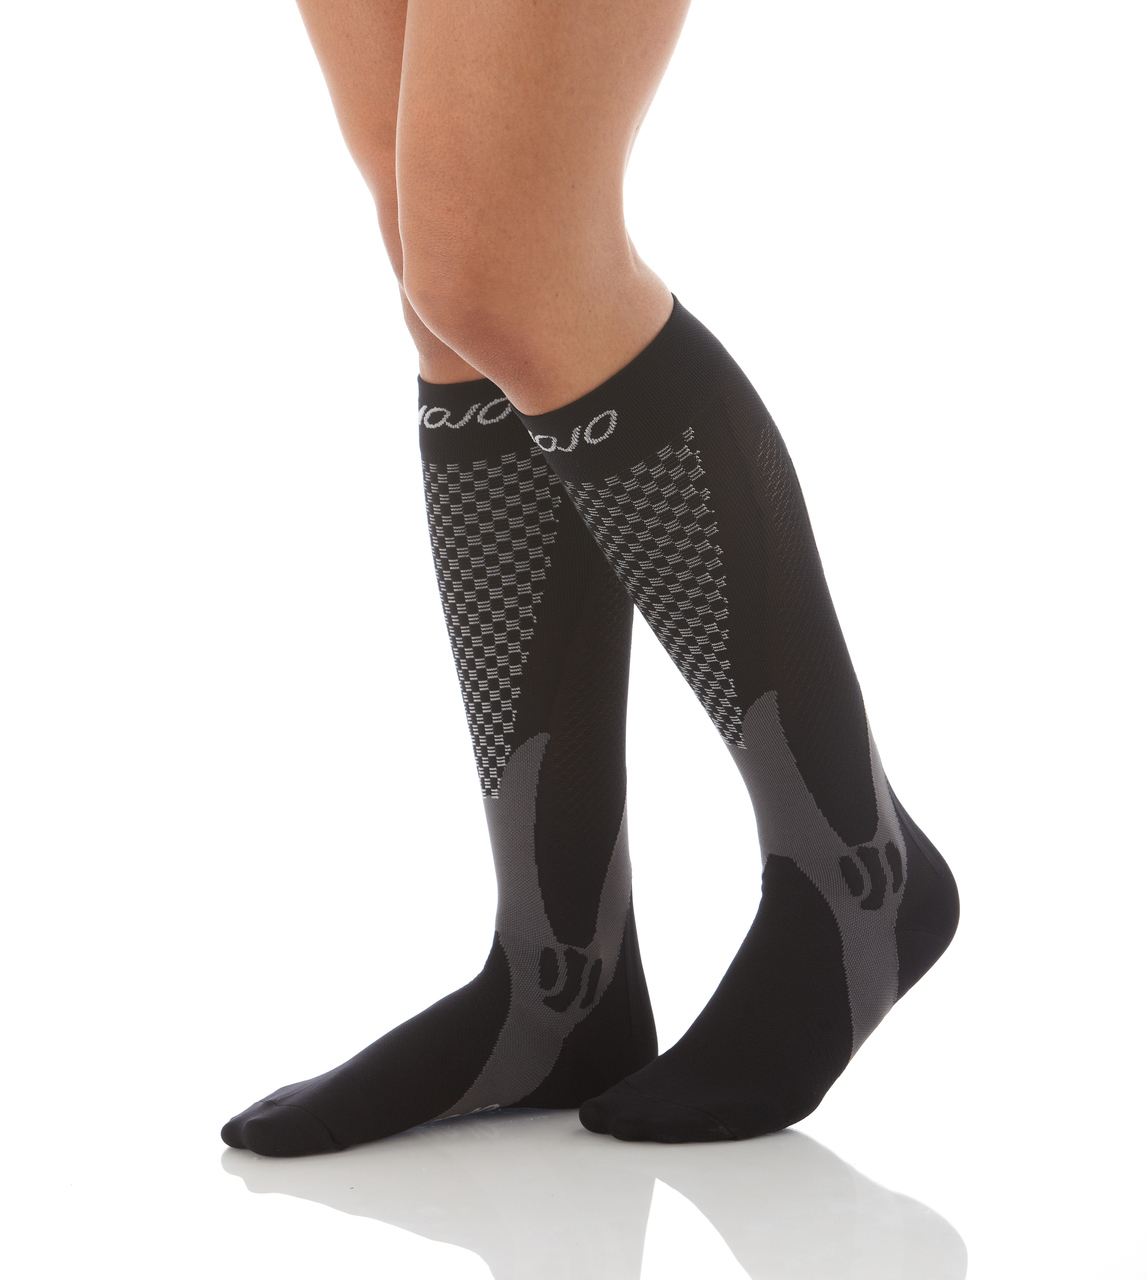 MoJo Recovery & Performance Sports Compression Socks - Firm Compression (20-30mmHg)(A602)